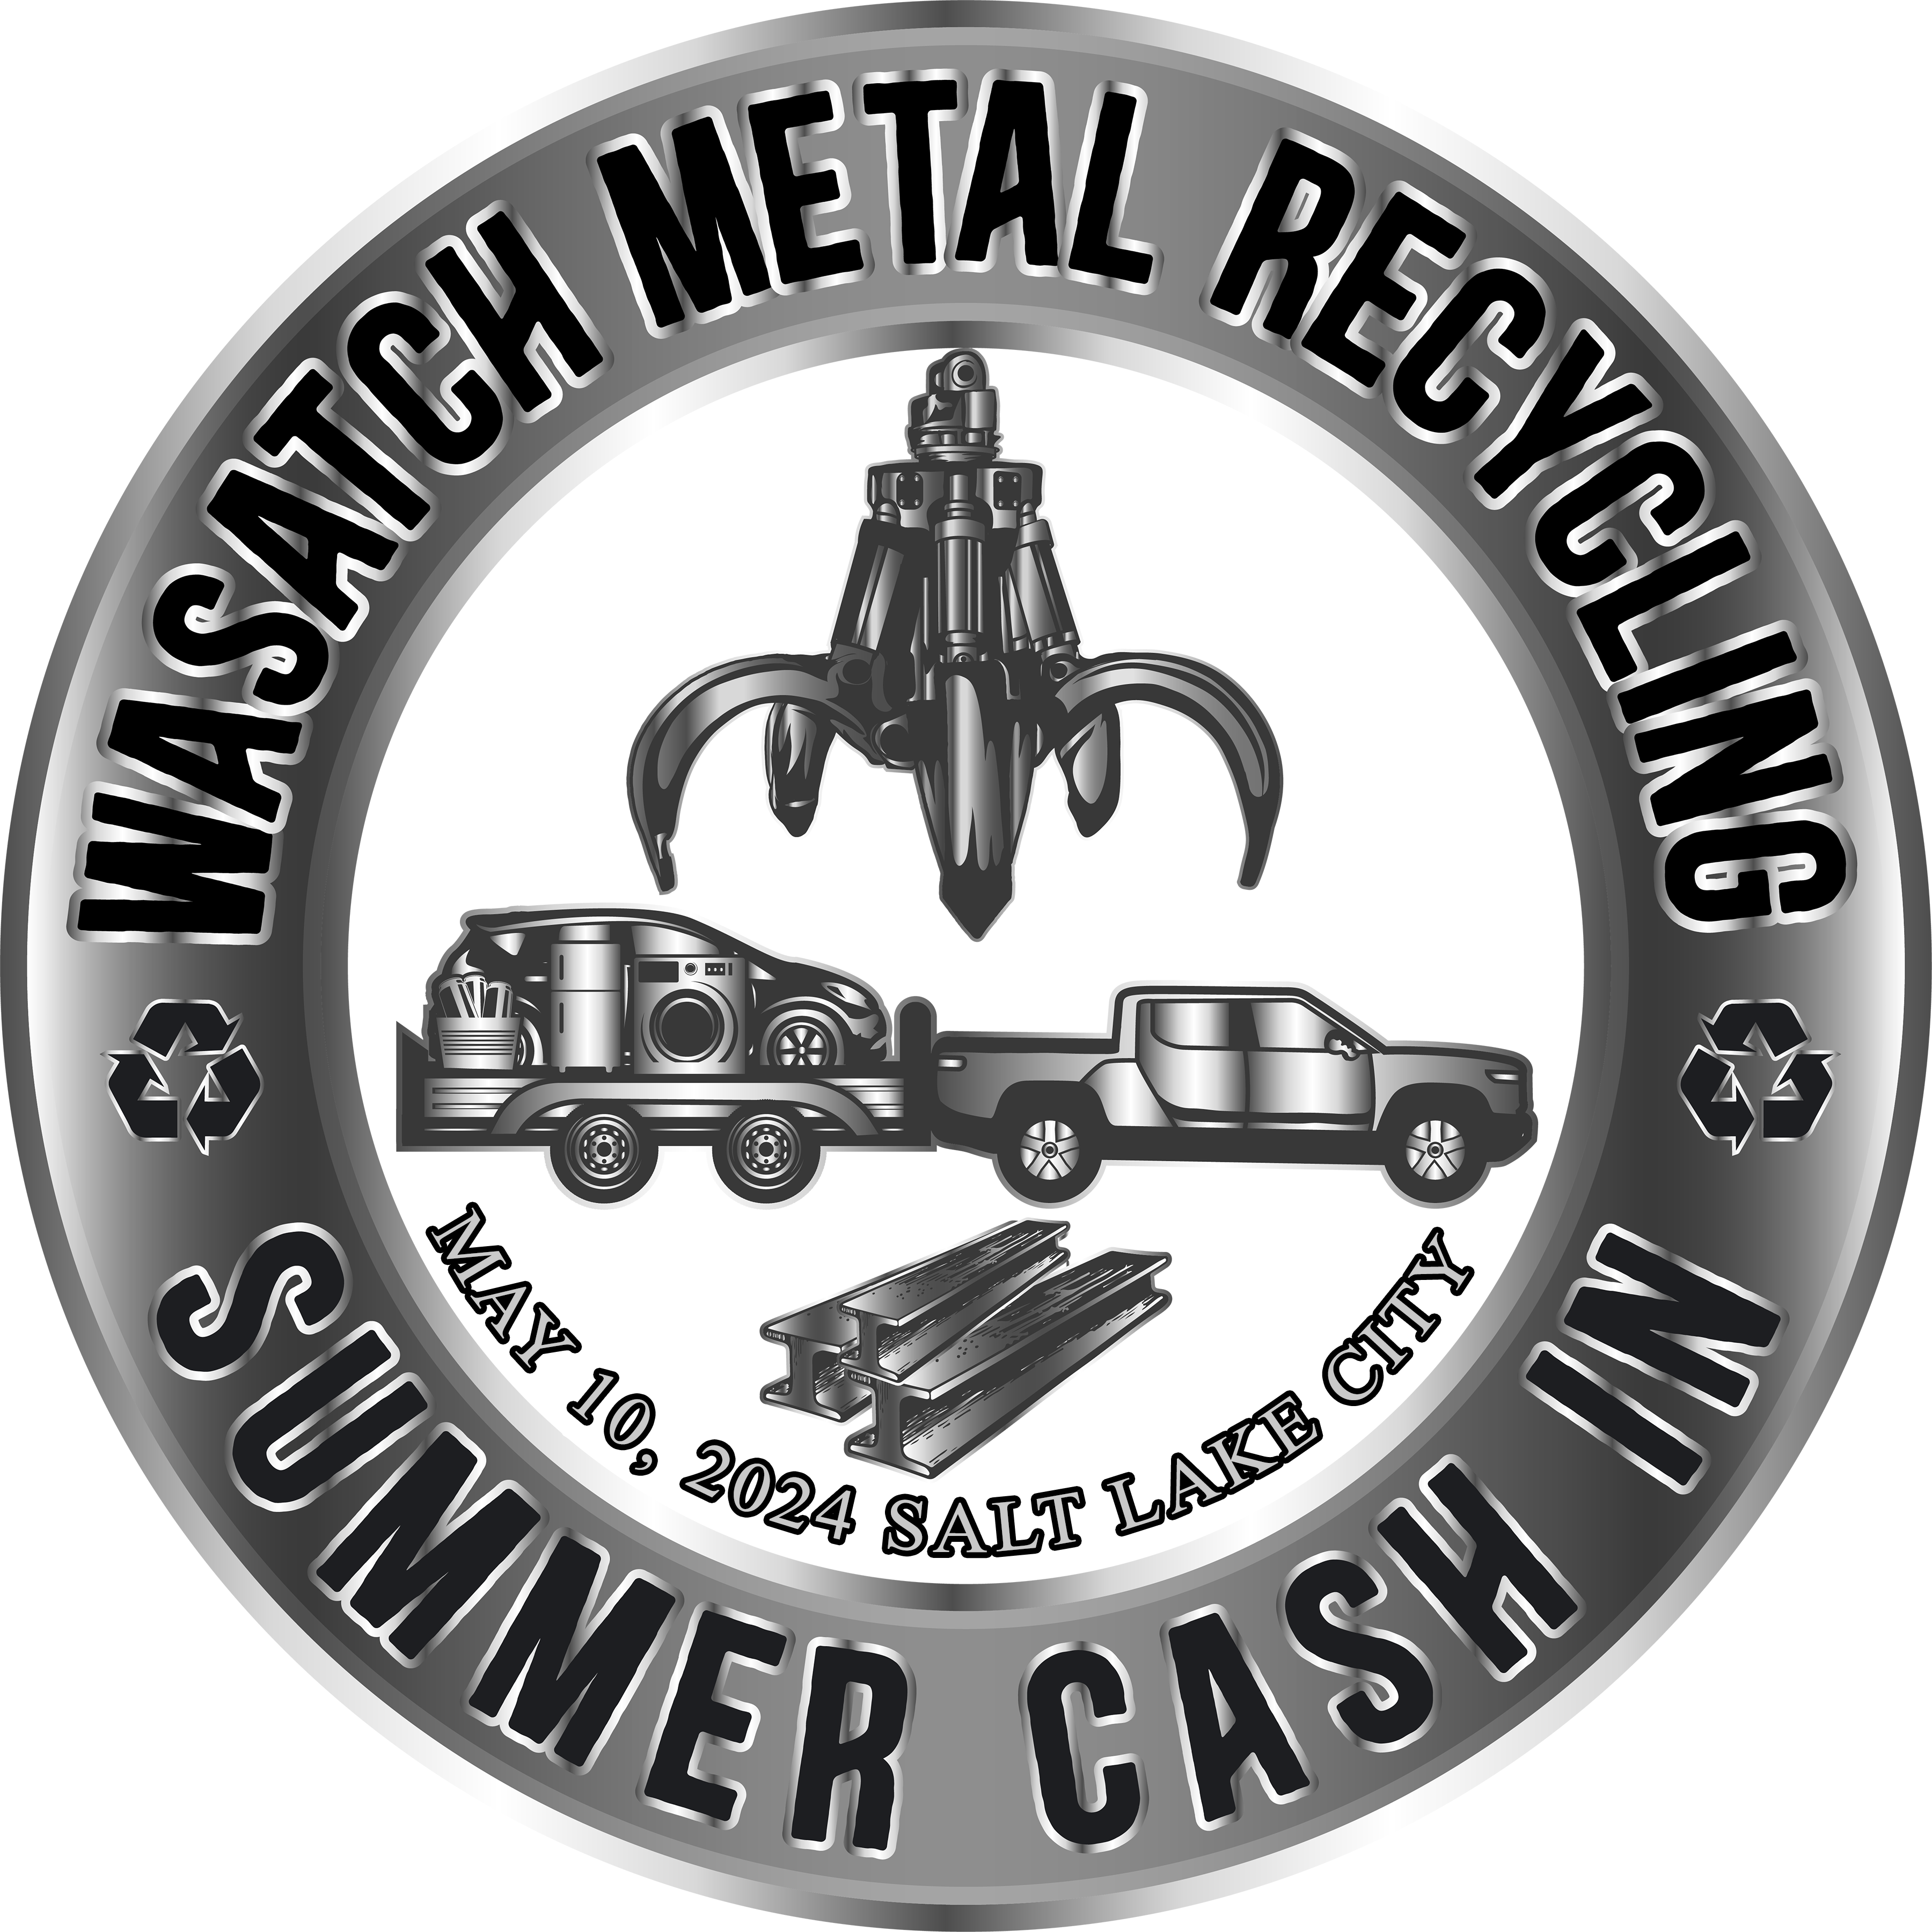 Wasatch Metal Recycling - Summer Cash In Recycling Event